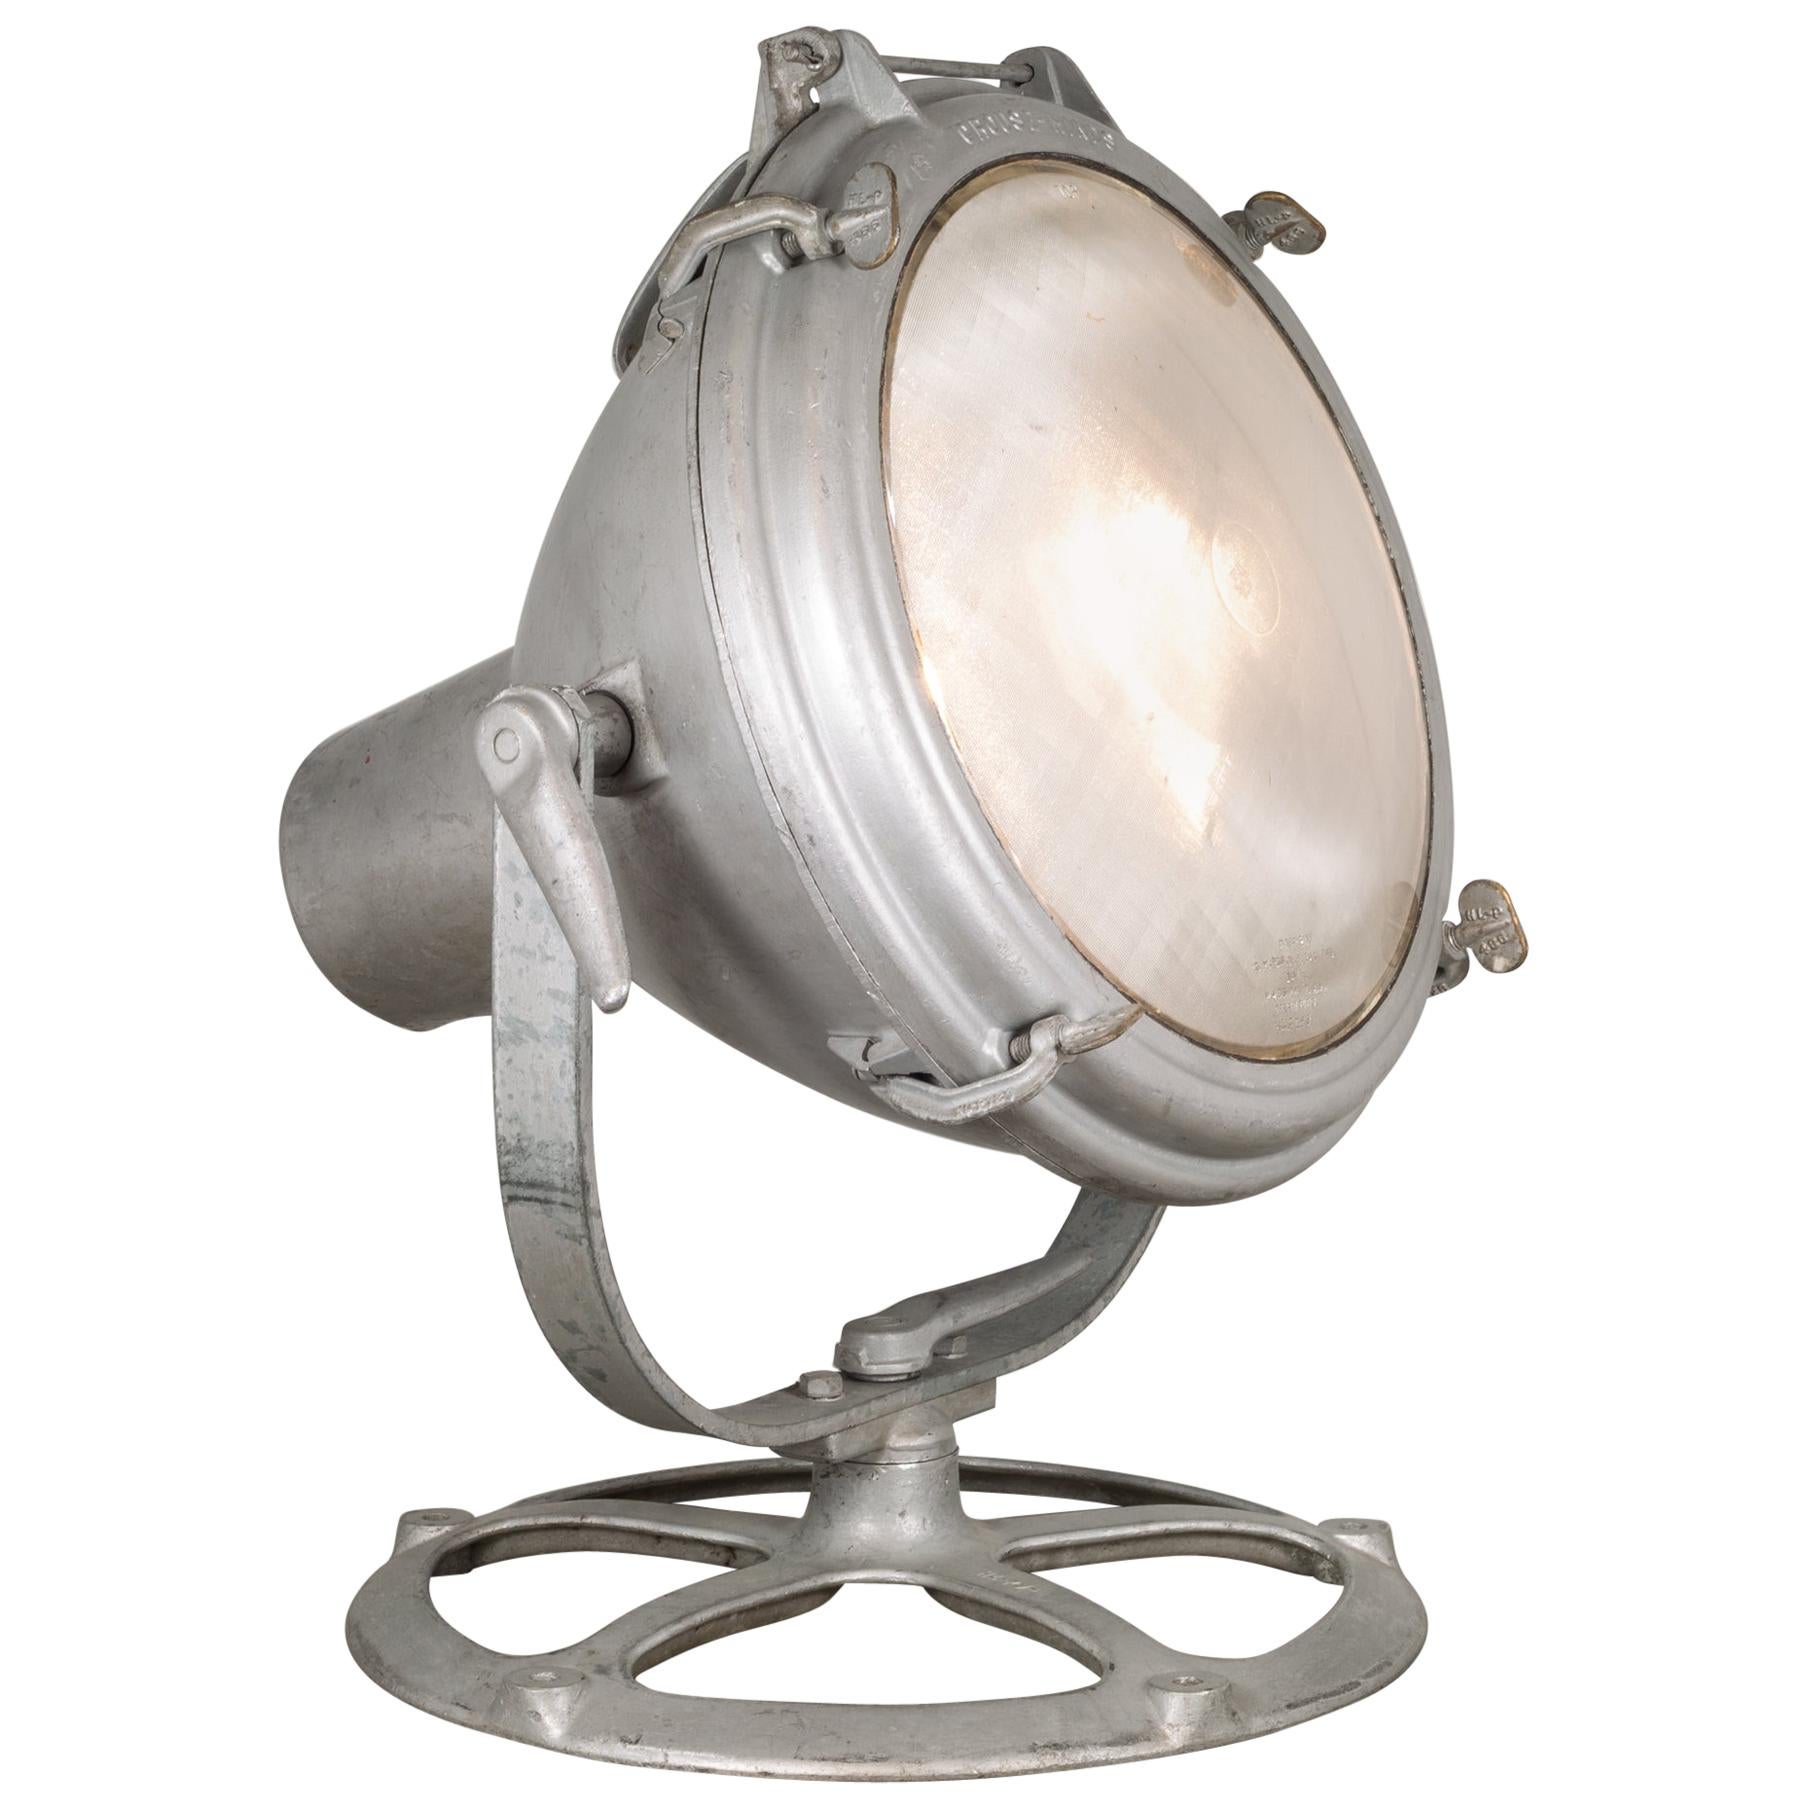 Details about   Antique Vintage Navy Maritime Industrial Crouse Hinds Spotlight Search Light 